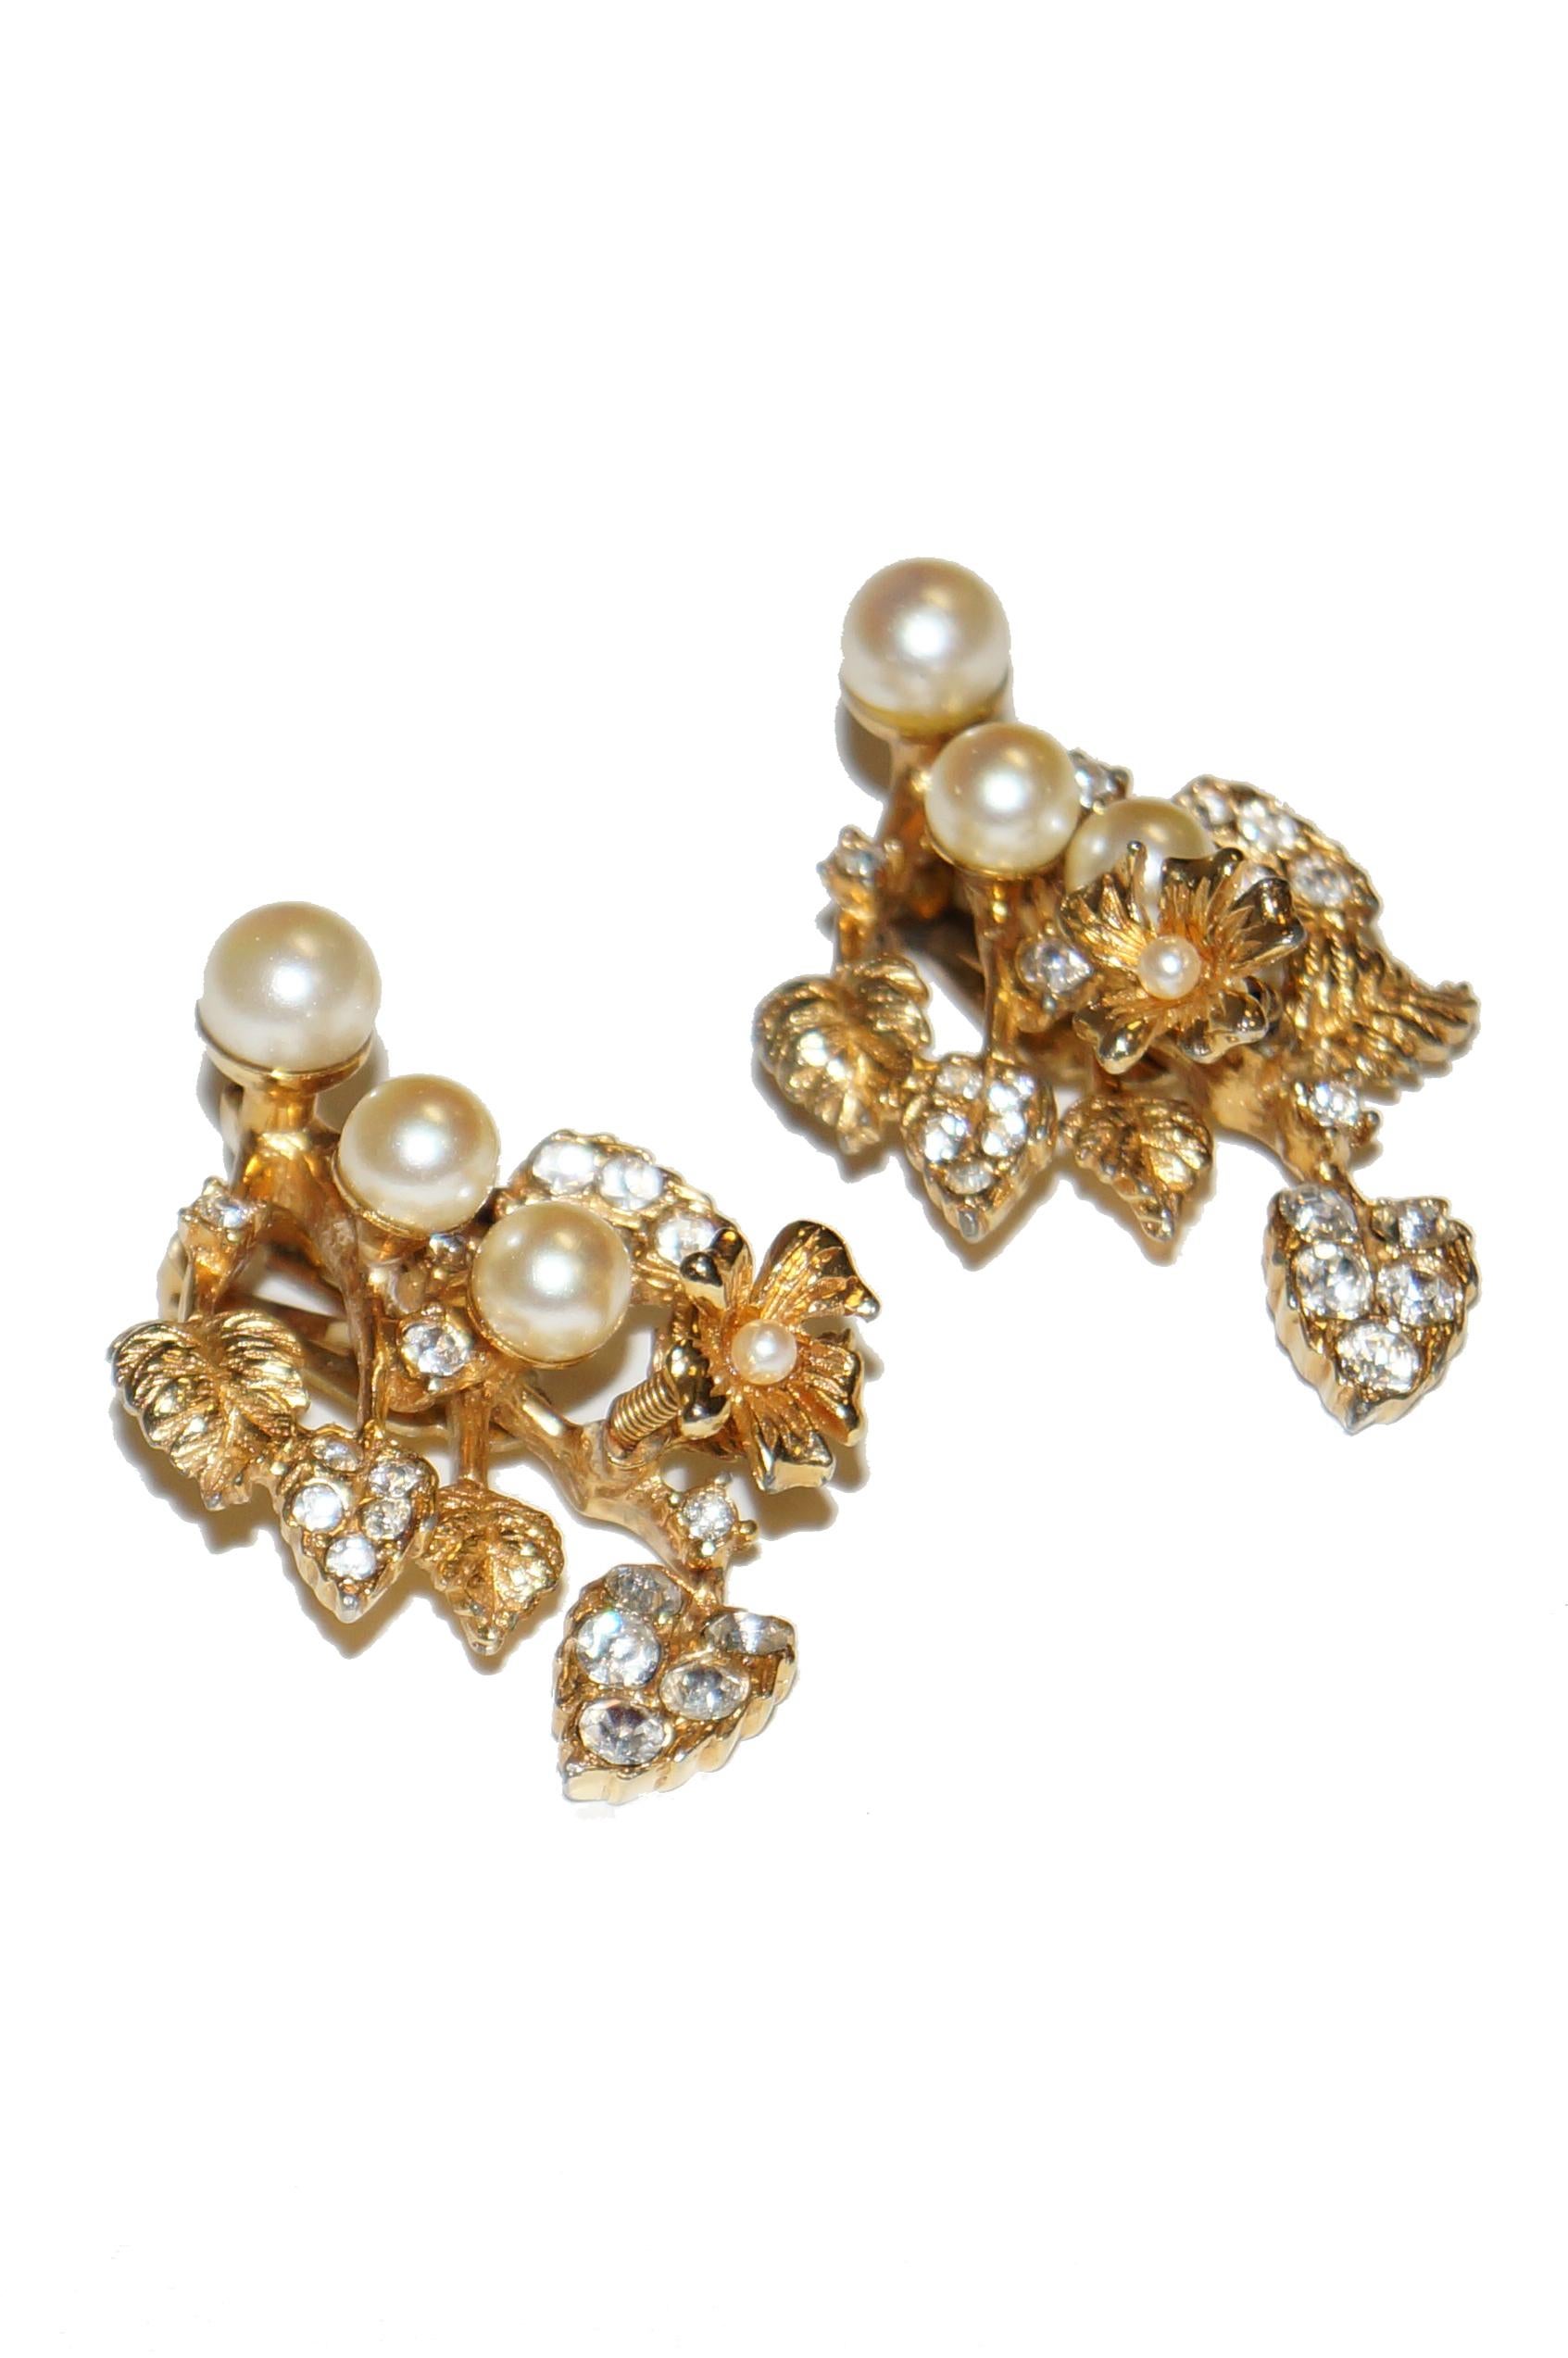 This opulent set of gold tone pearl and rhinestone earrings is indicative of the luxurious jewelry Hattie Carnegie designed in the 1950s and 1960s. The earrings features a wide spray floral design composed of various rhinestone encrusted leaves with